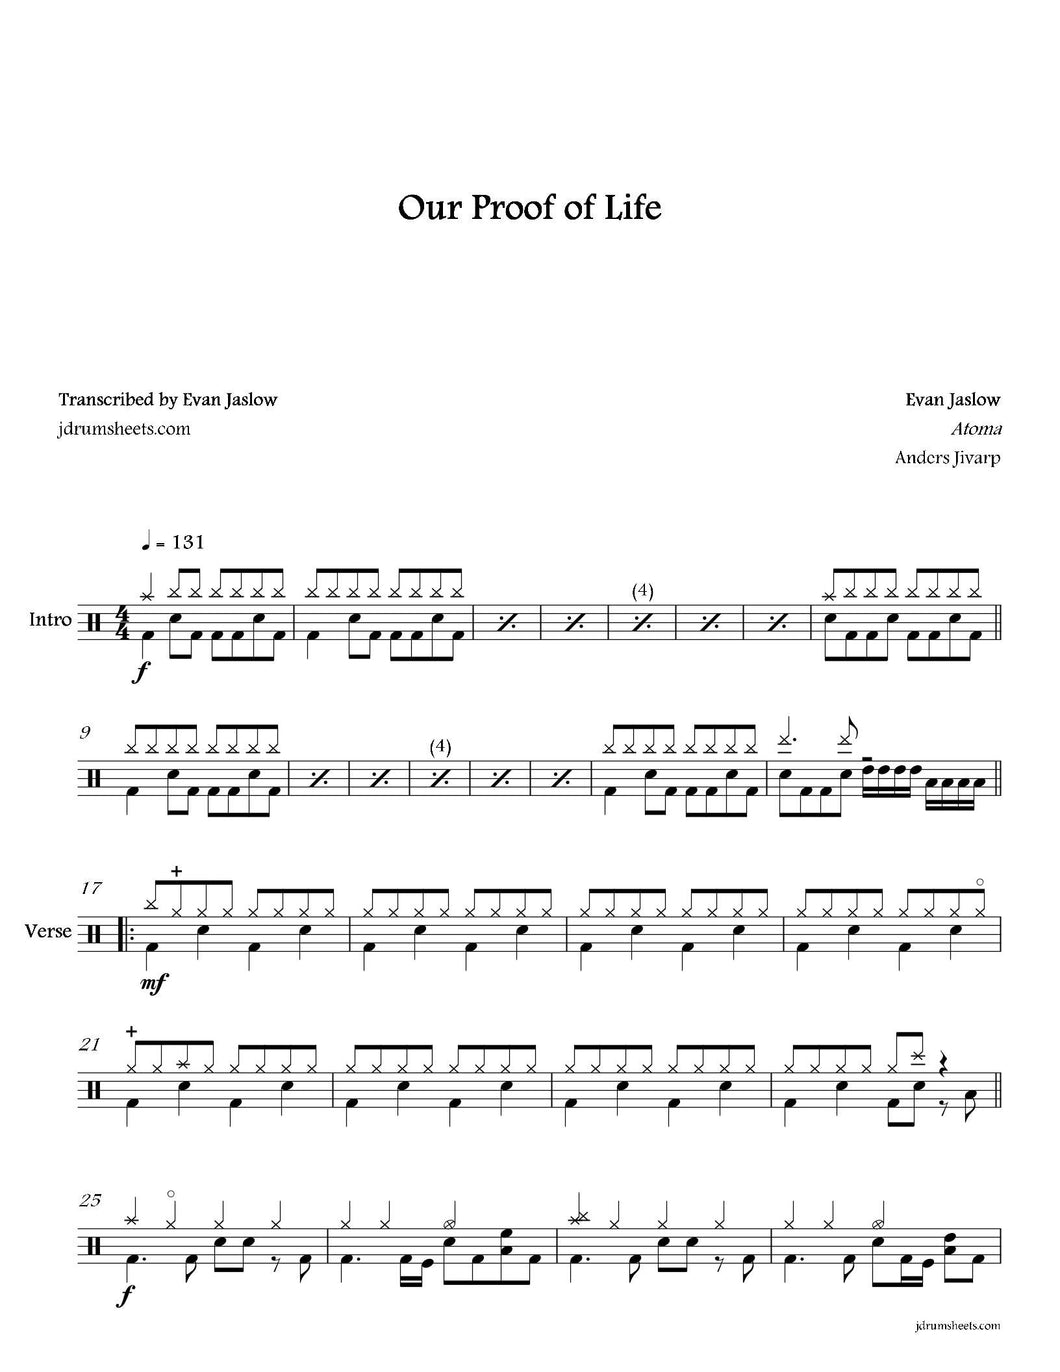 Our Proof of Life - Dark Tranquillity - Full Drum Transcription / Drum Sheet Music - Jaslow Drum Sheets